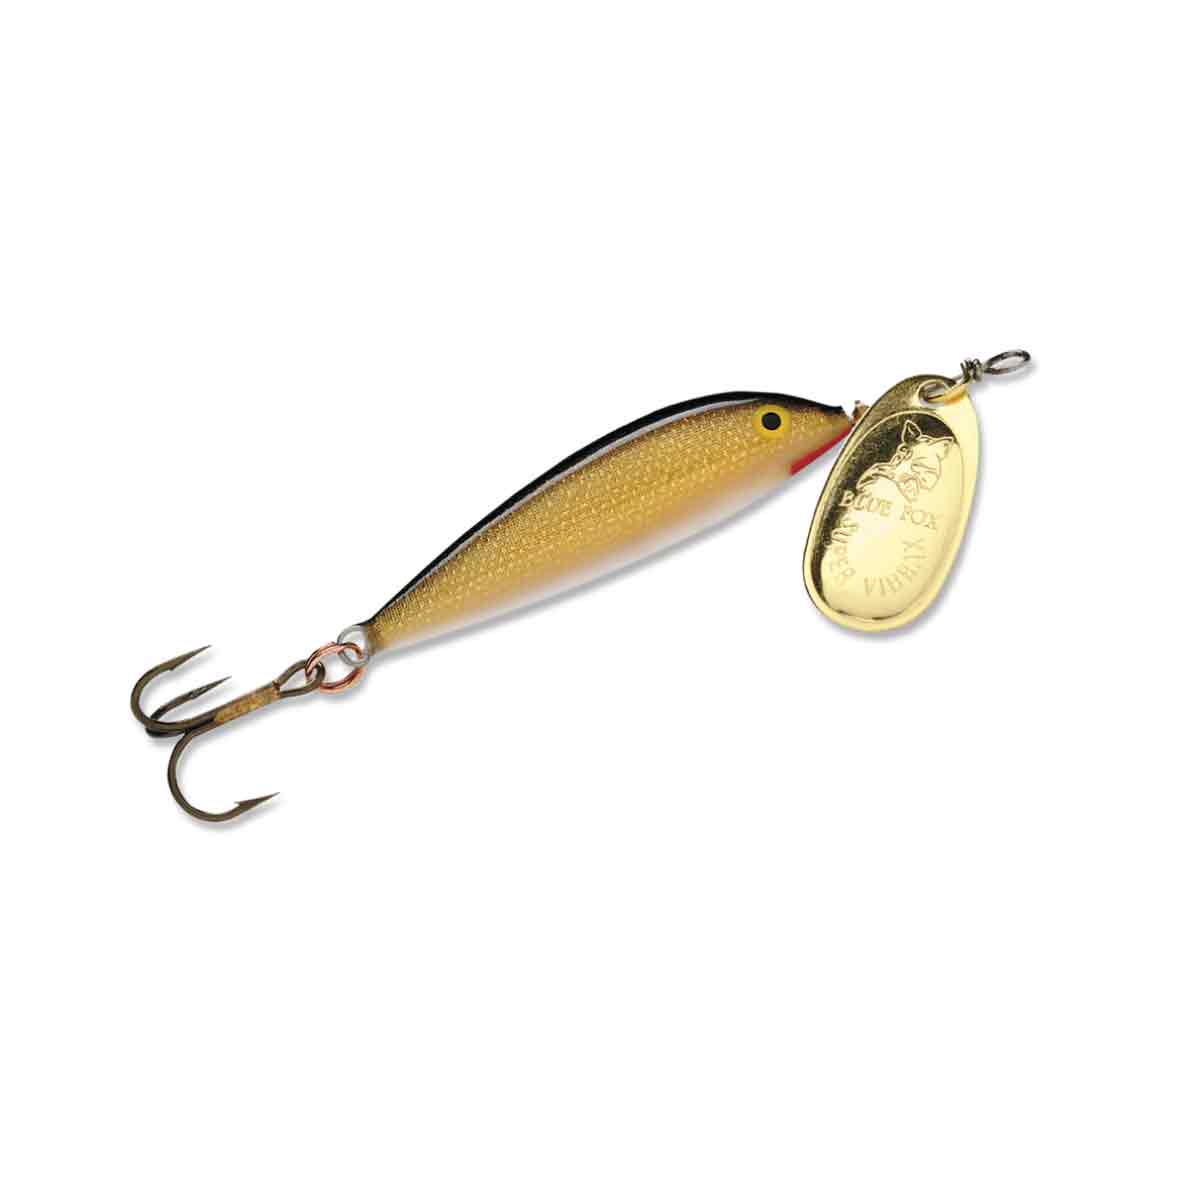 Vibrax Minnow Spin_Gold/Plated Gold